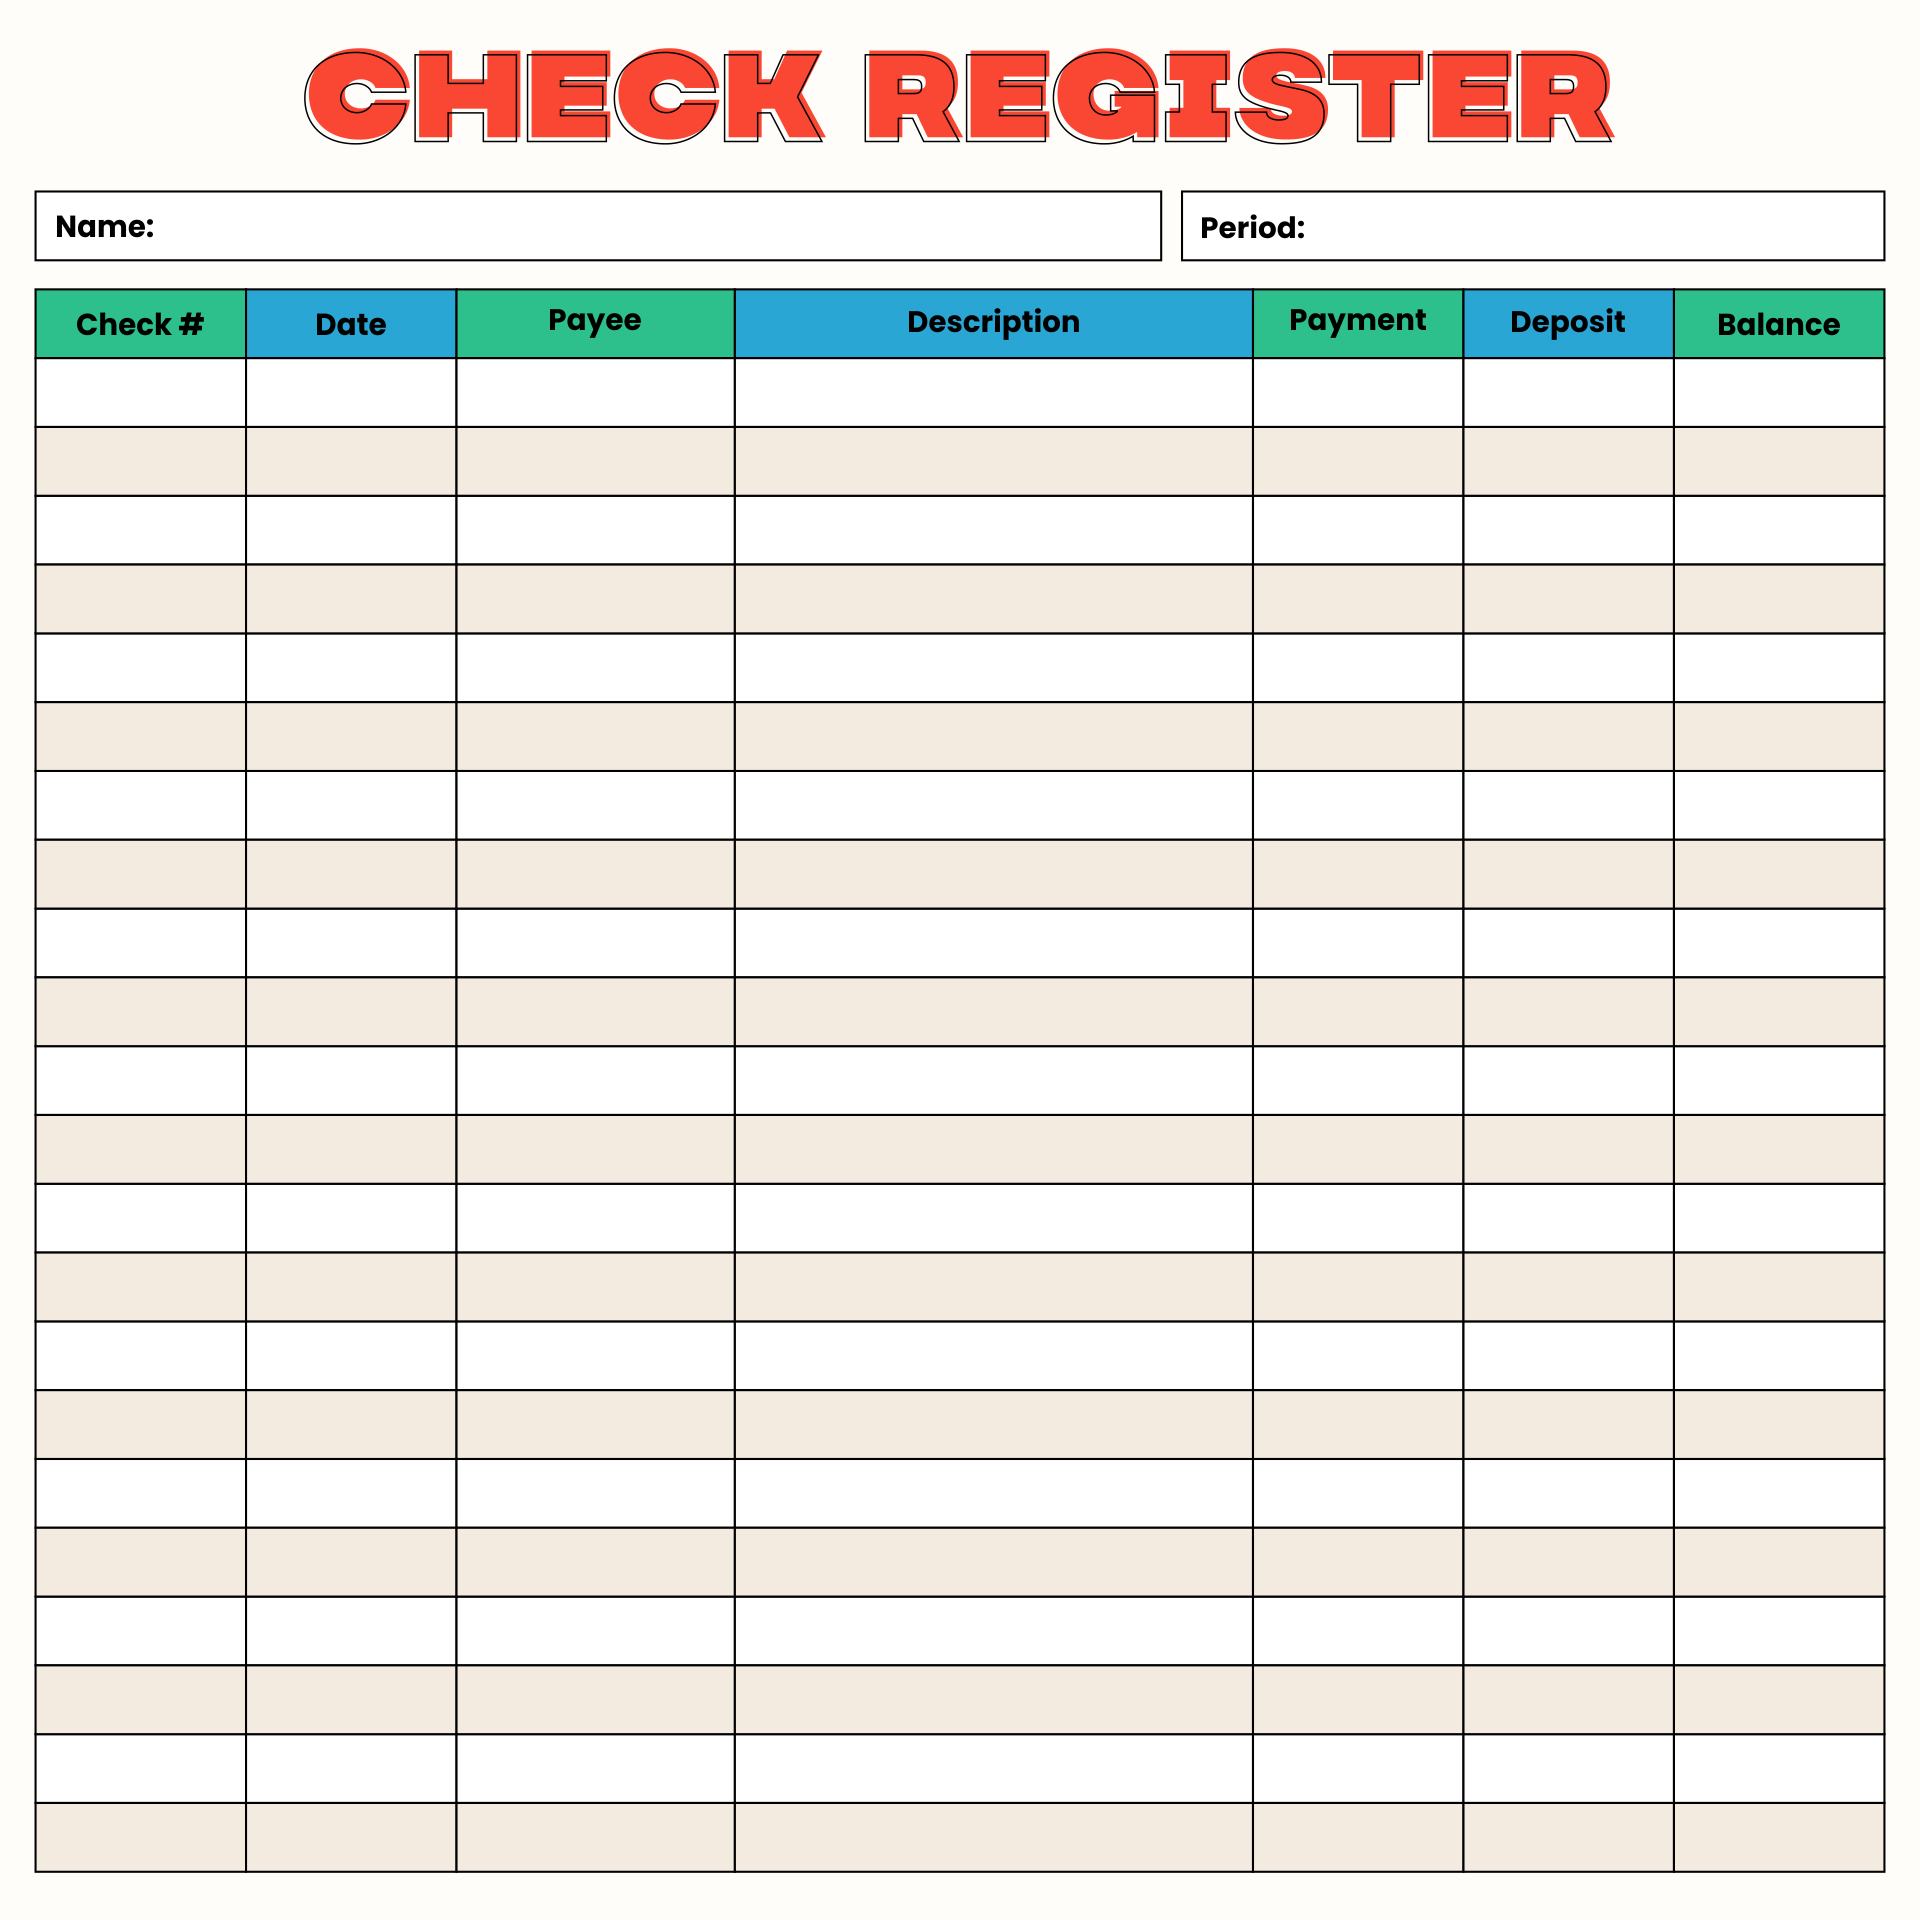 free-printable-checks-for-kids-my-stay-at-home-adventures